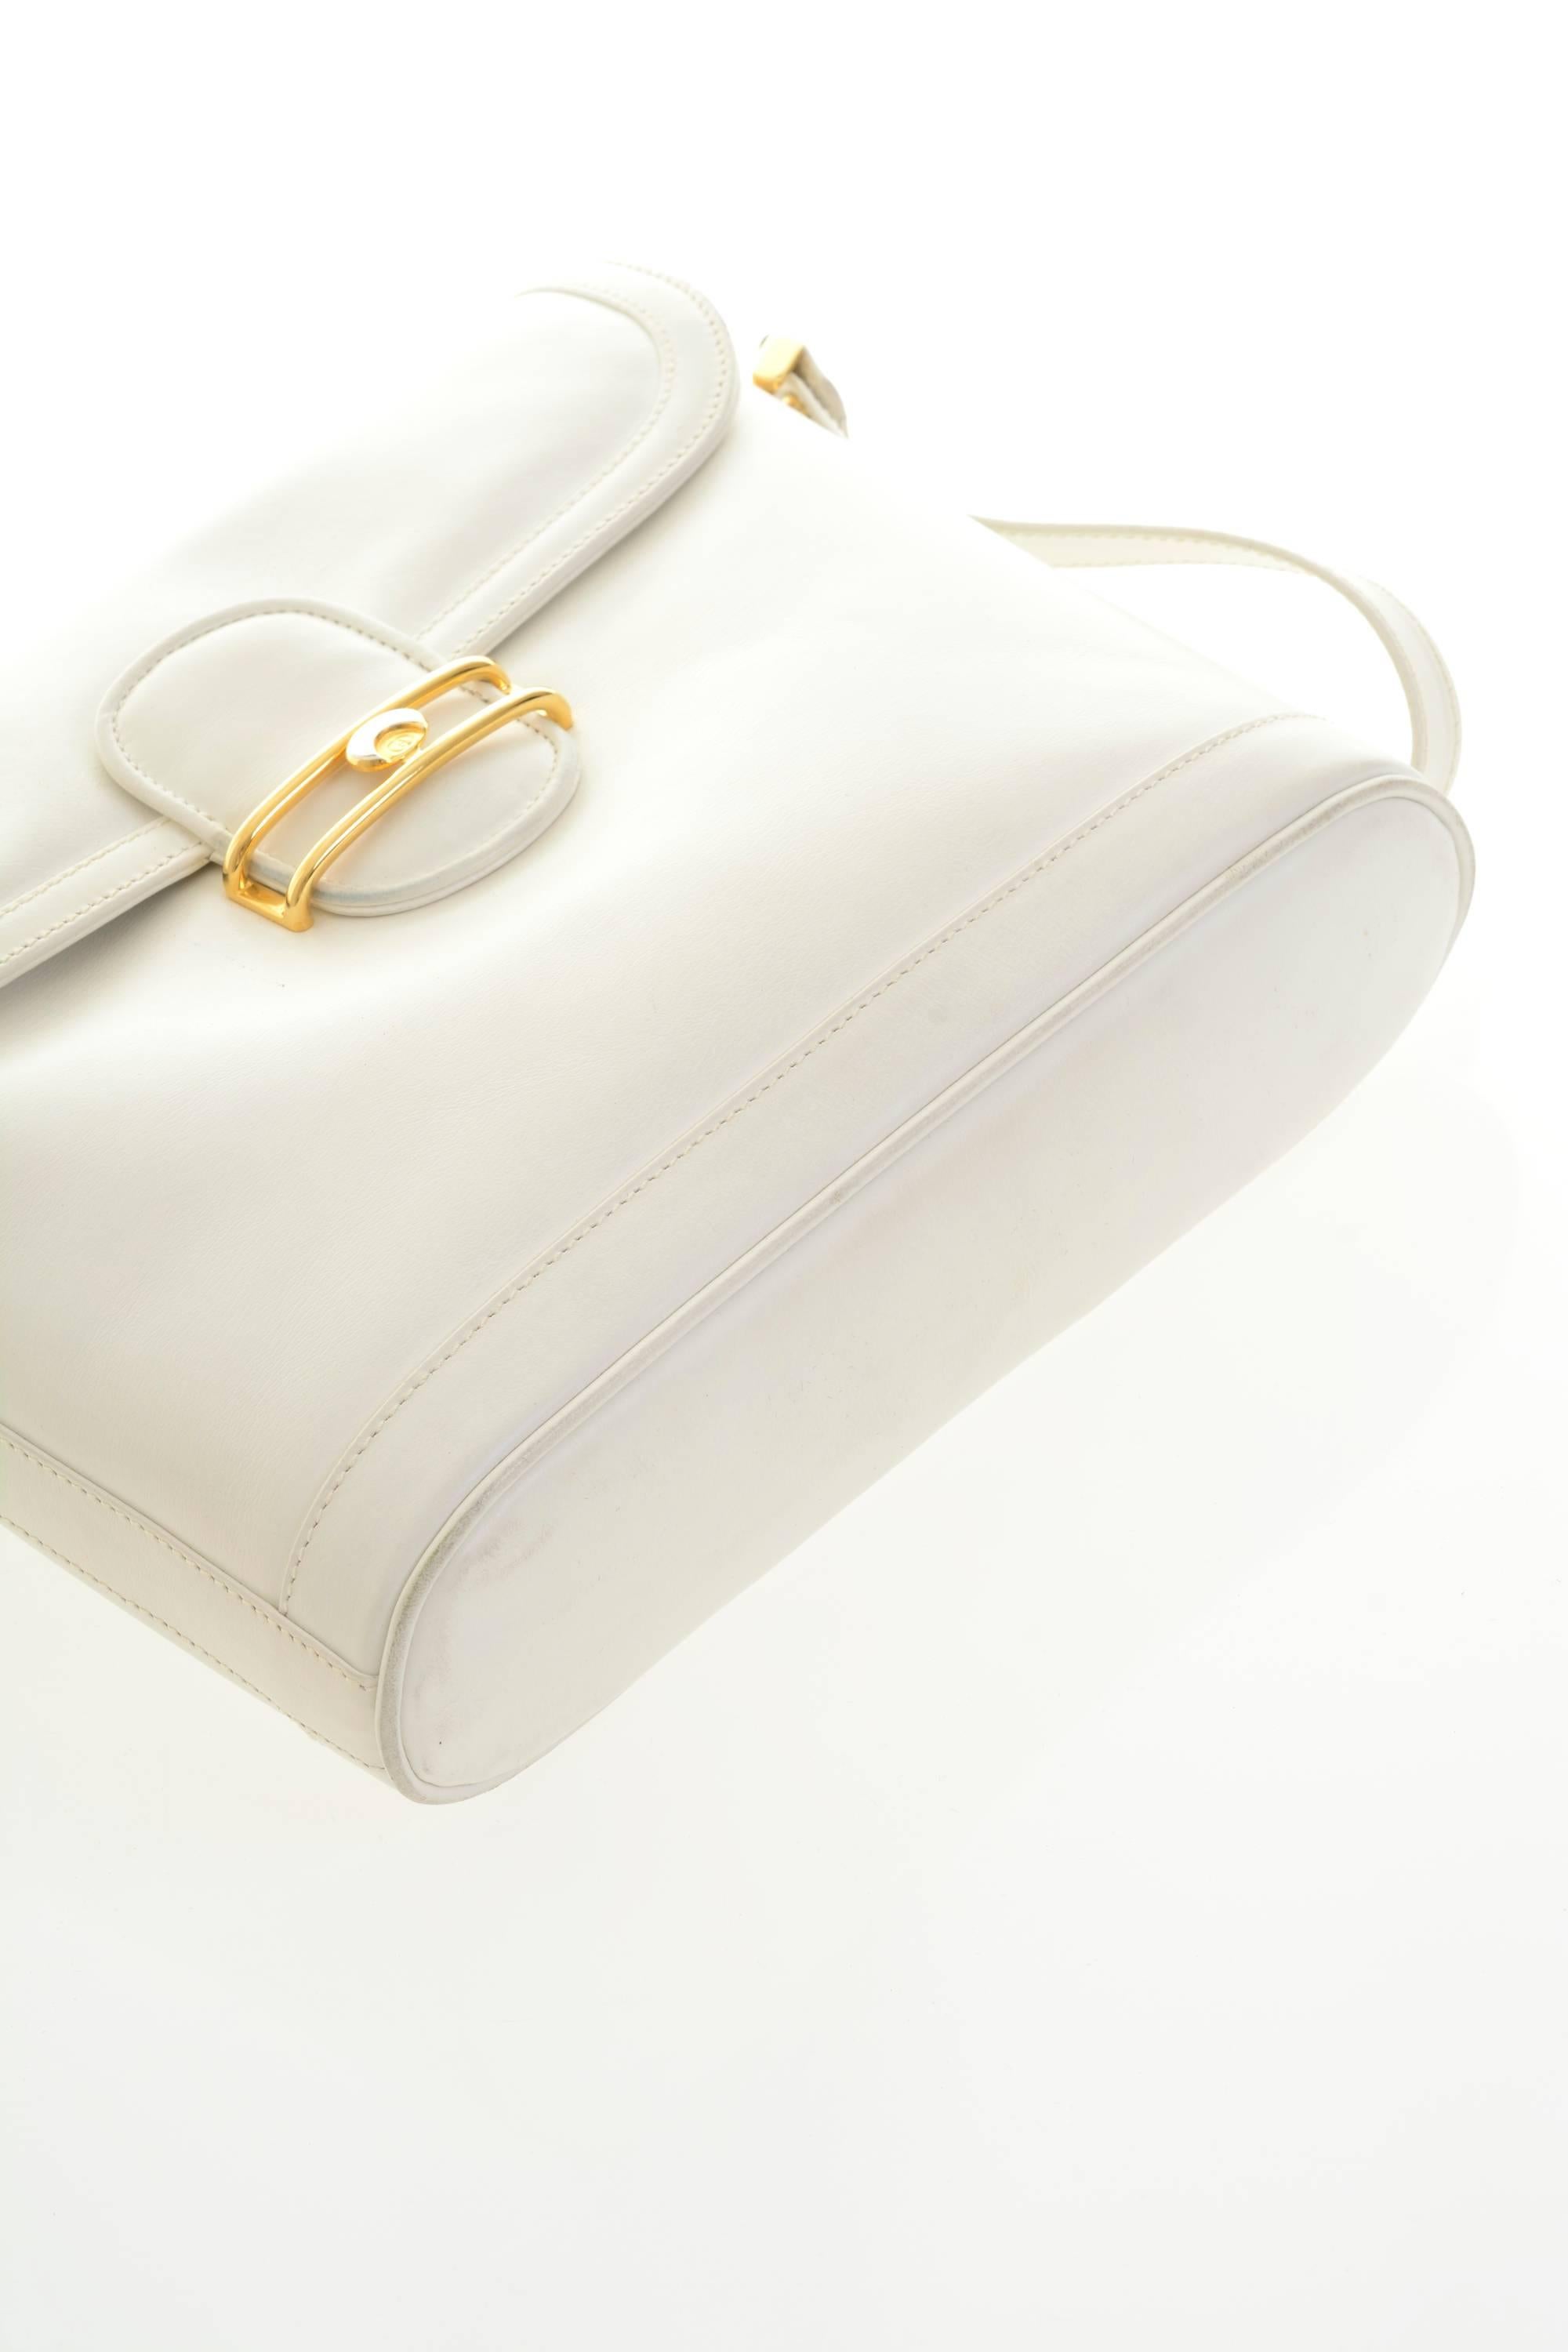 1970s GUCCI Authentic Rare White Leather Shoulder Bag In Good Condition In Milan, Italy